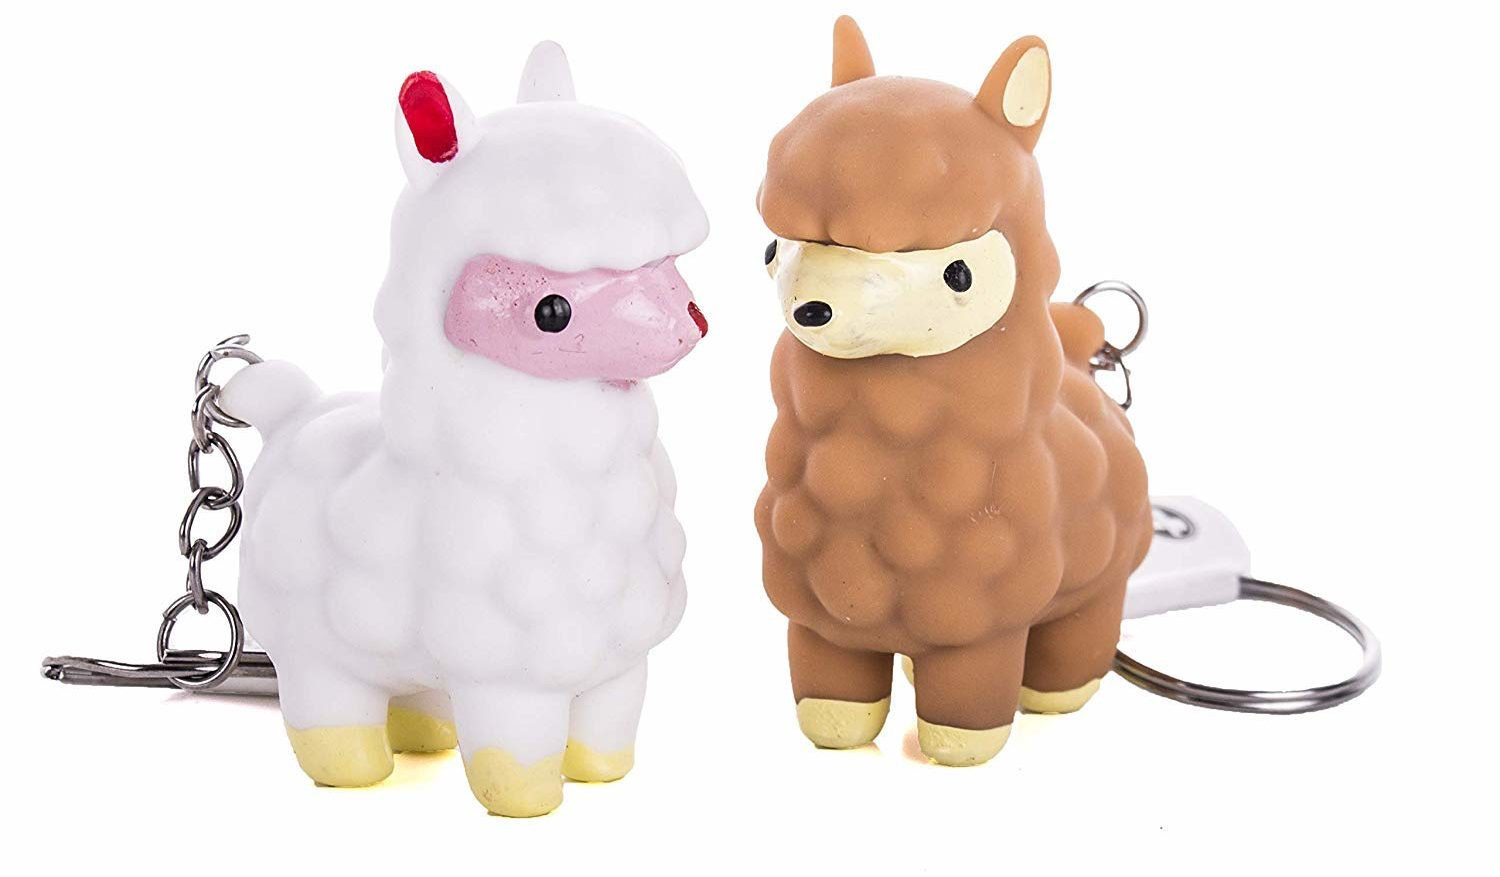 Most Popular Kids Gifts 2020
 12 Llama Toys & Gifts 2020 – Llamas are Everywhere This Year